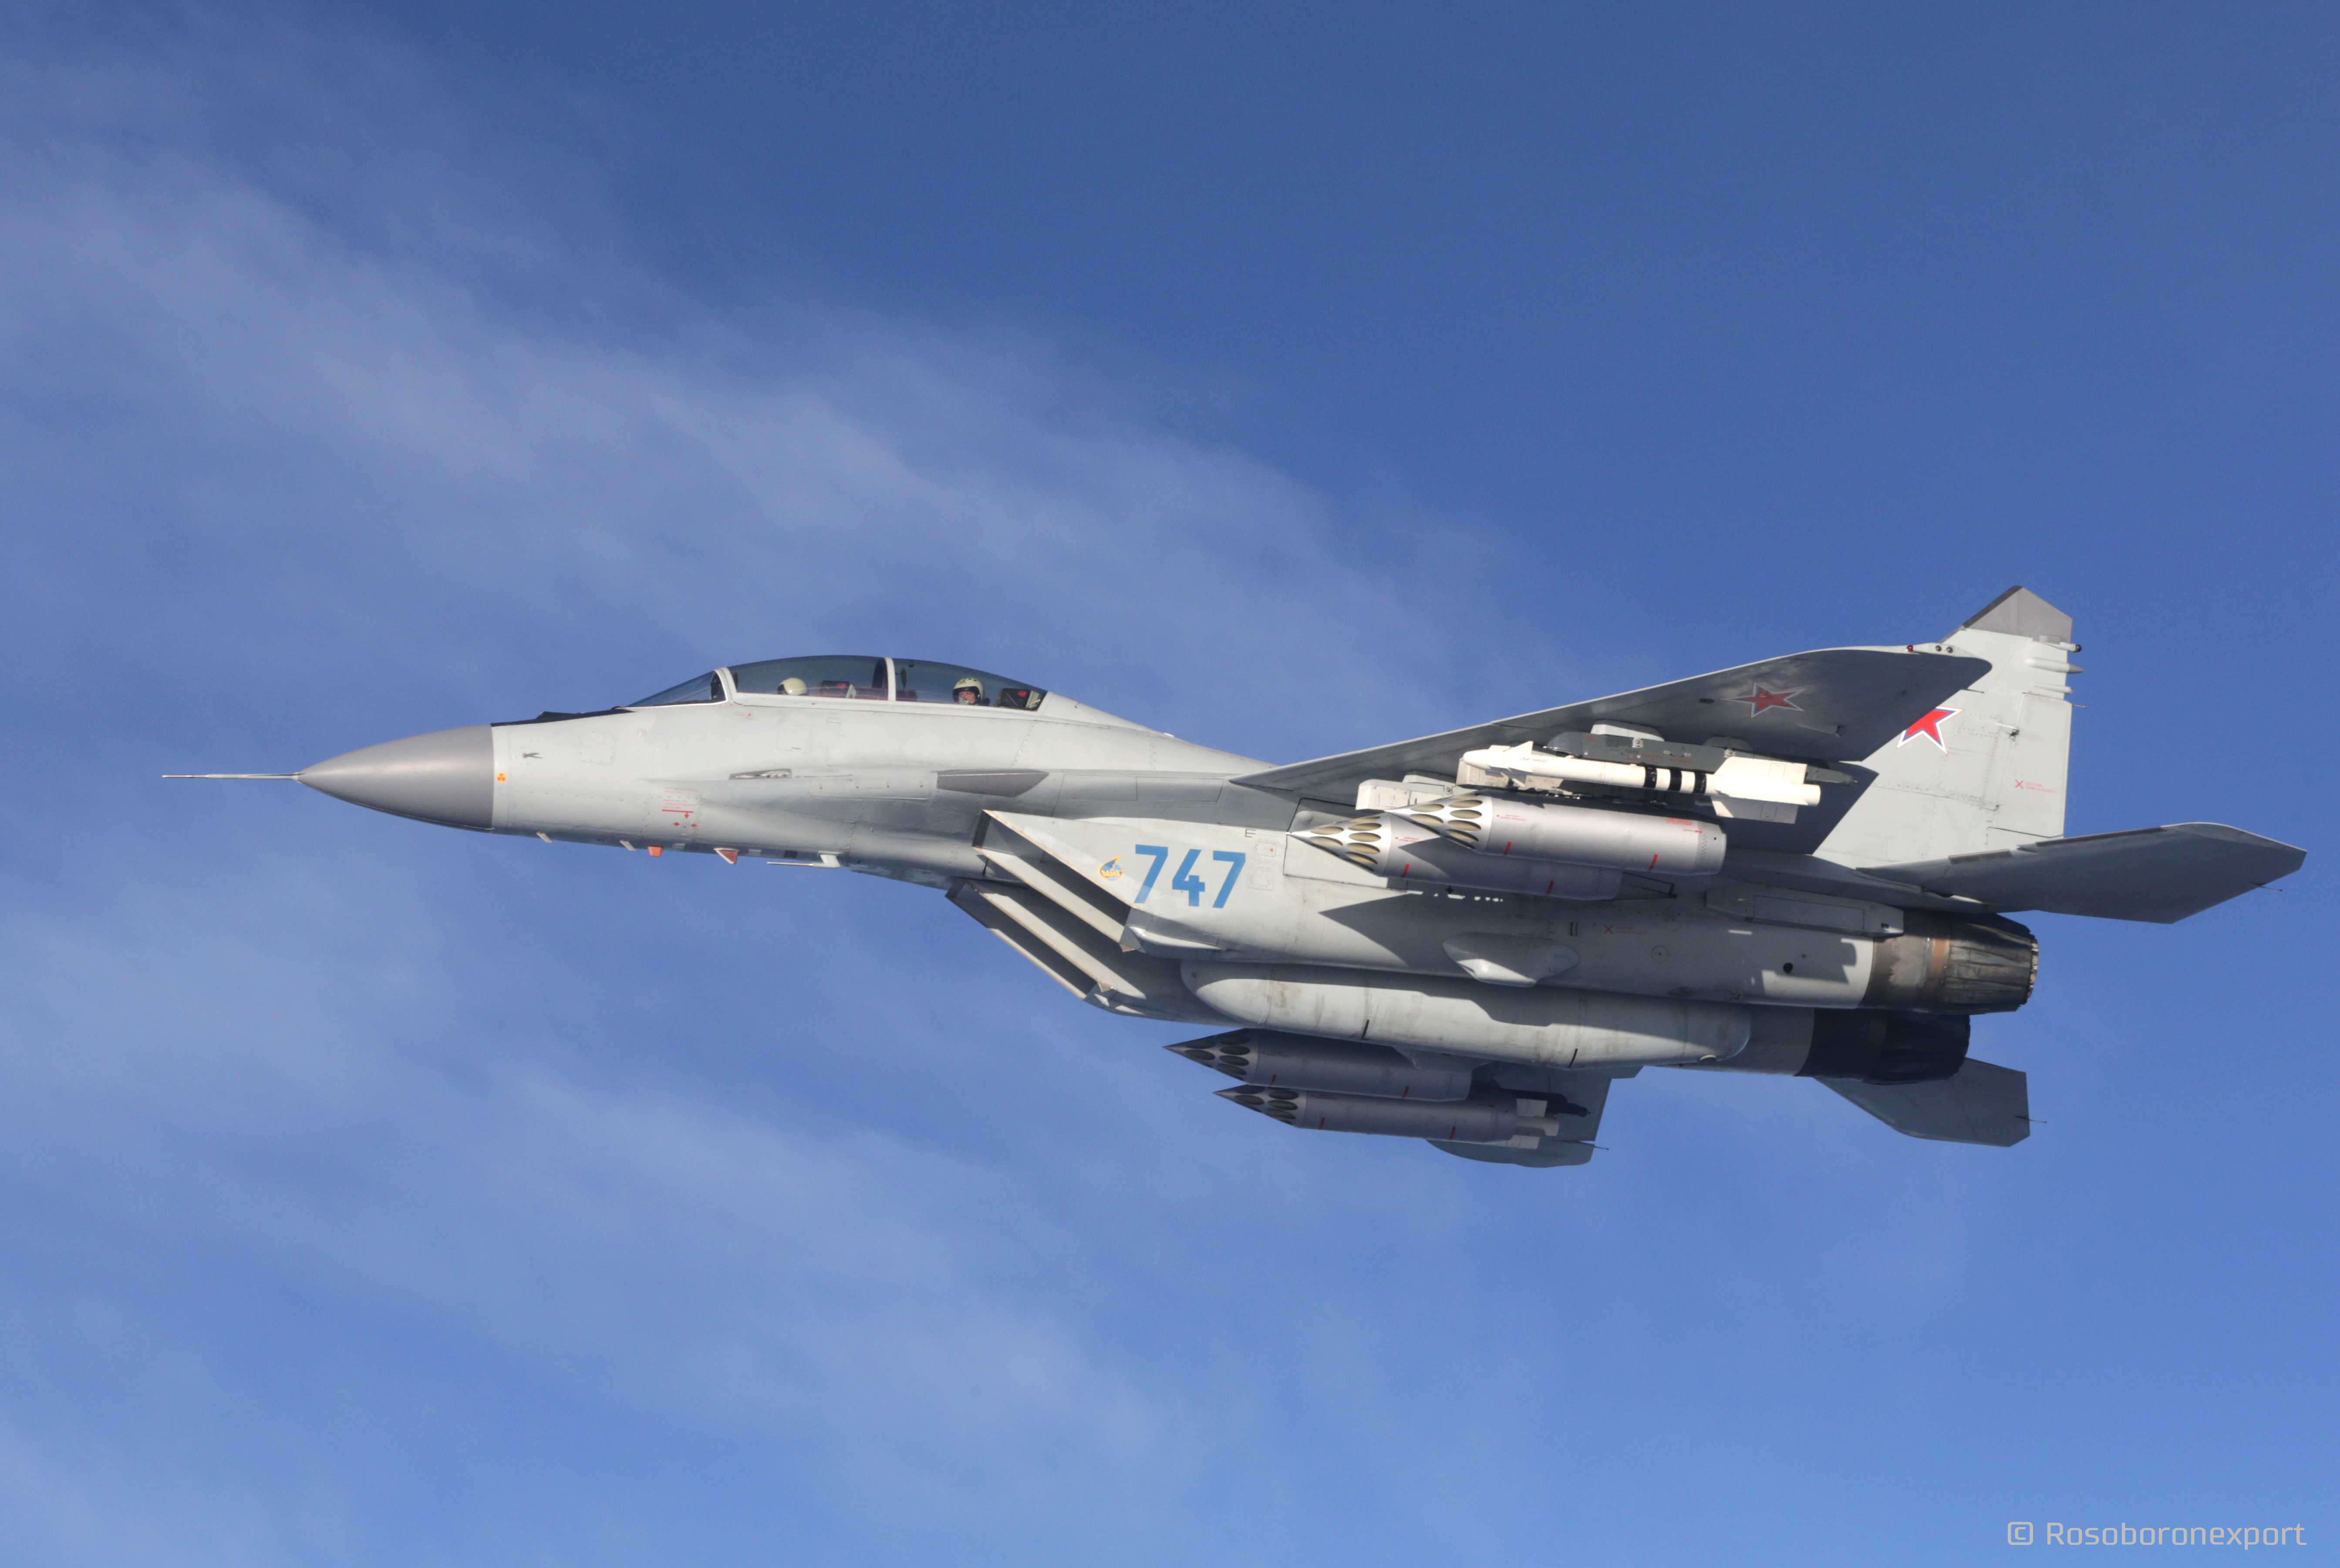 Mikoyan MiG-29M2 Two-seat multifunctional Frontline Fighter